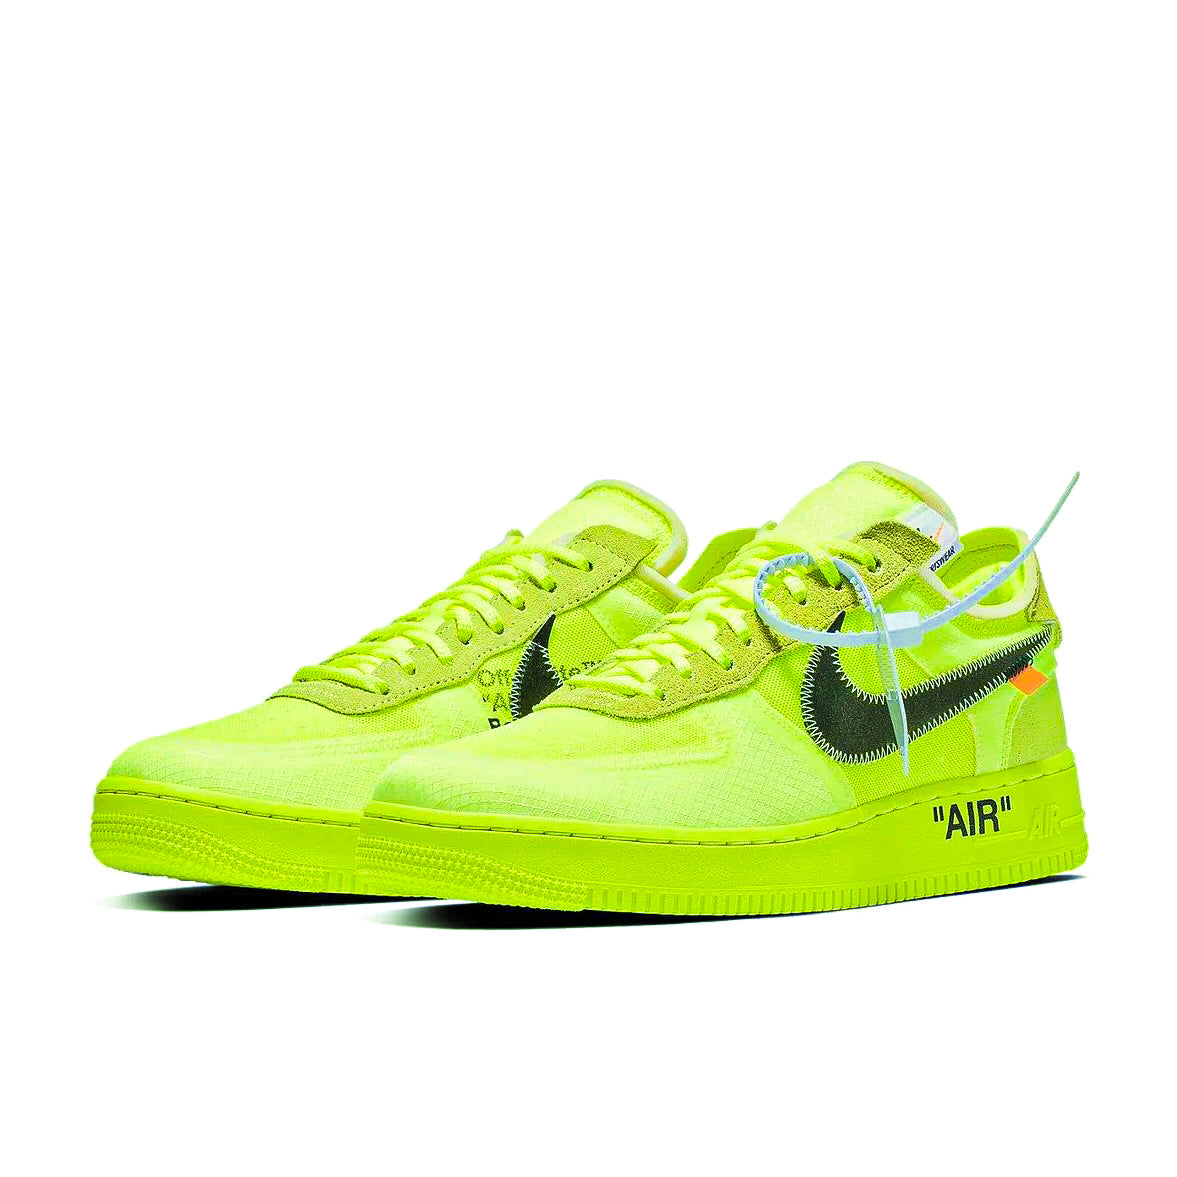 NIKE AIR FORCE 1 LOW - OFF WHITE VOLT